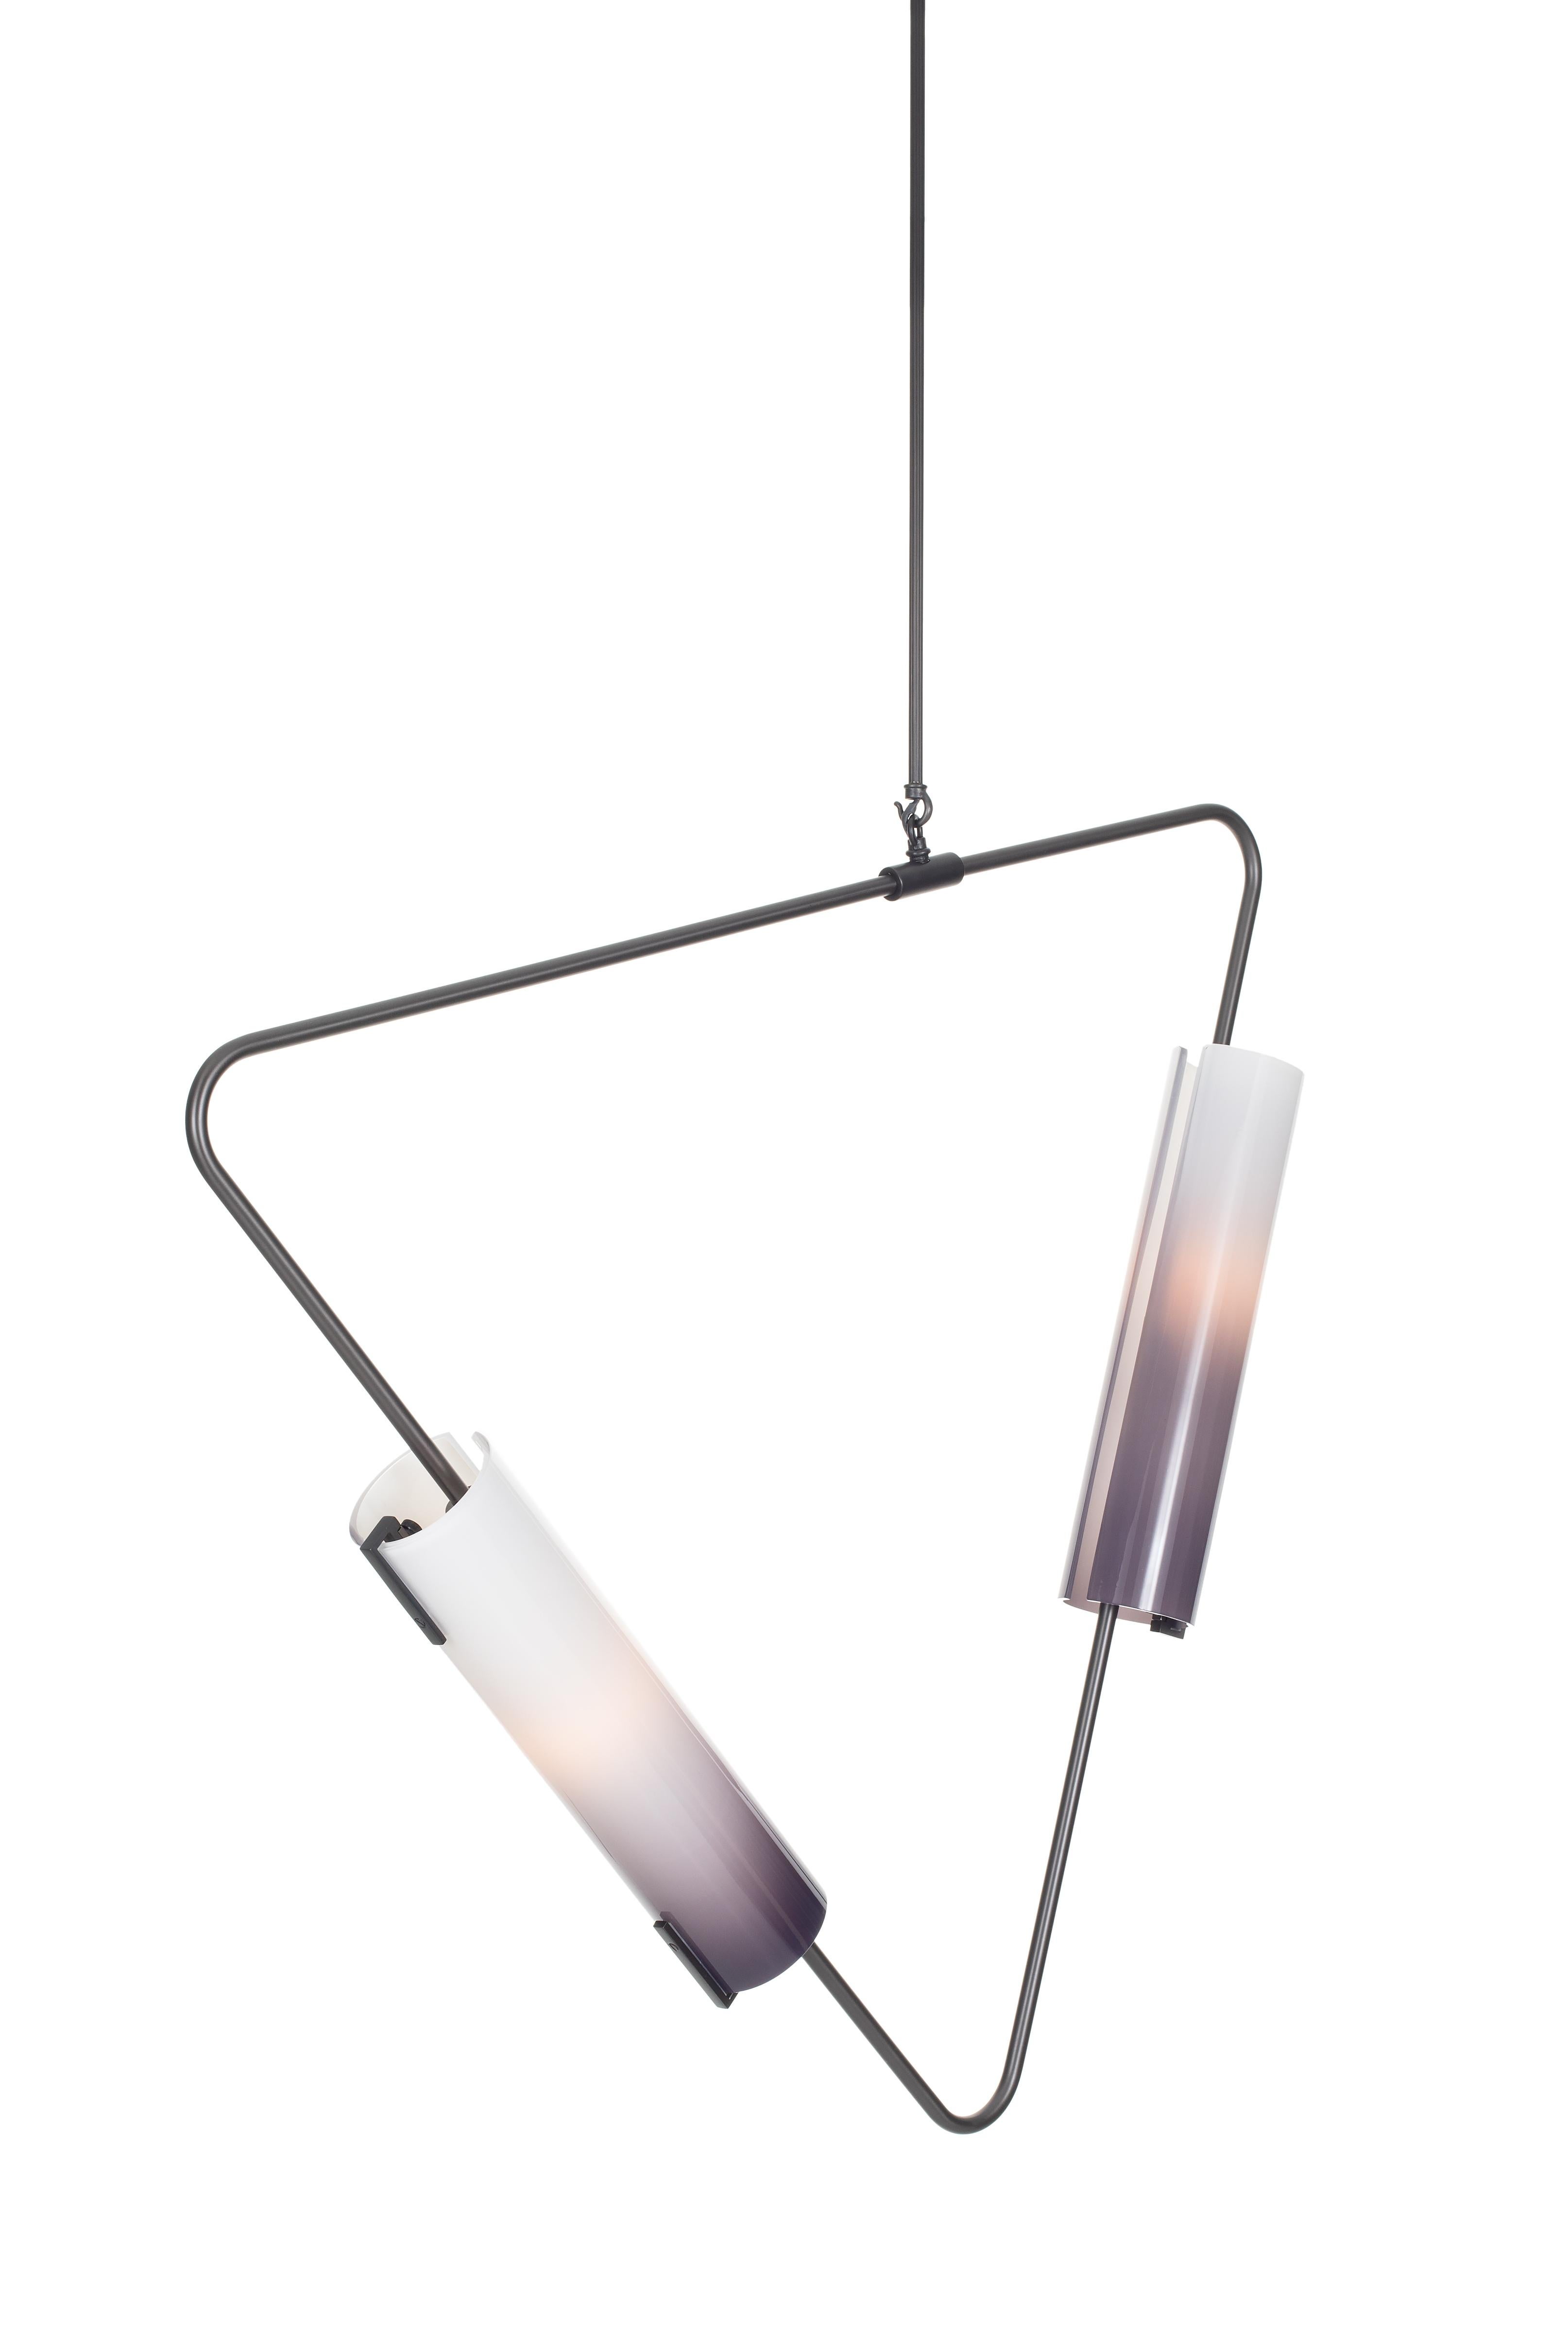 Burnished Muse Pendant by Avram Rusu Studio in Antique Brass with Charcoal Shades For Sale